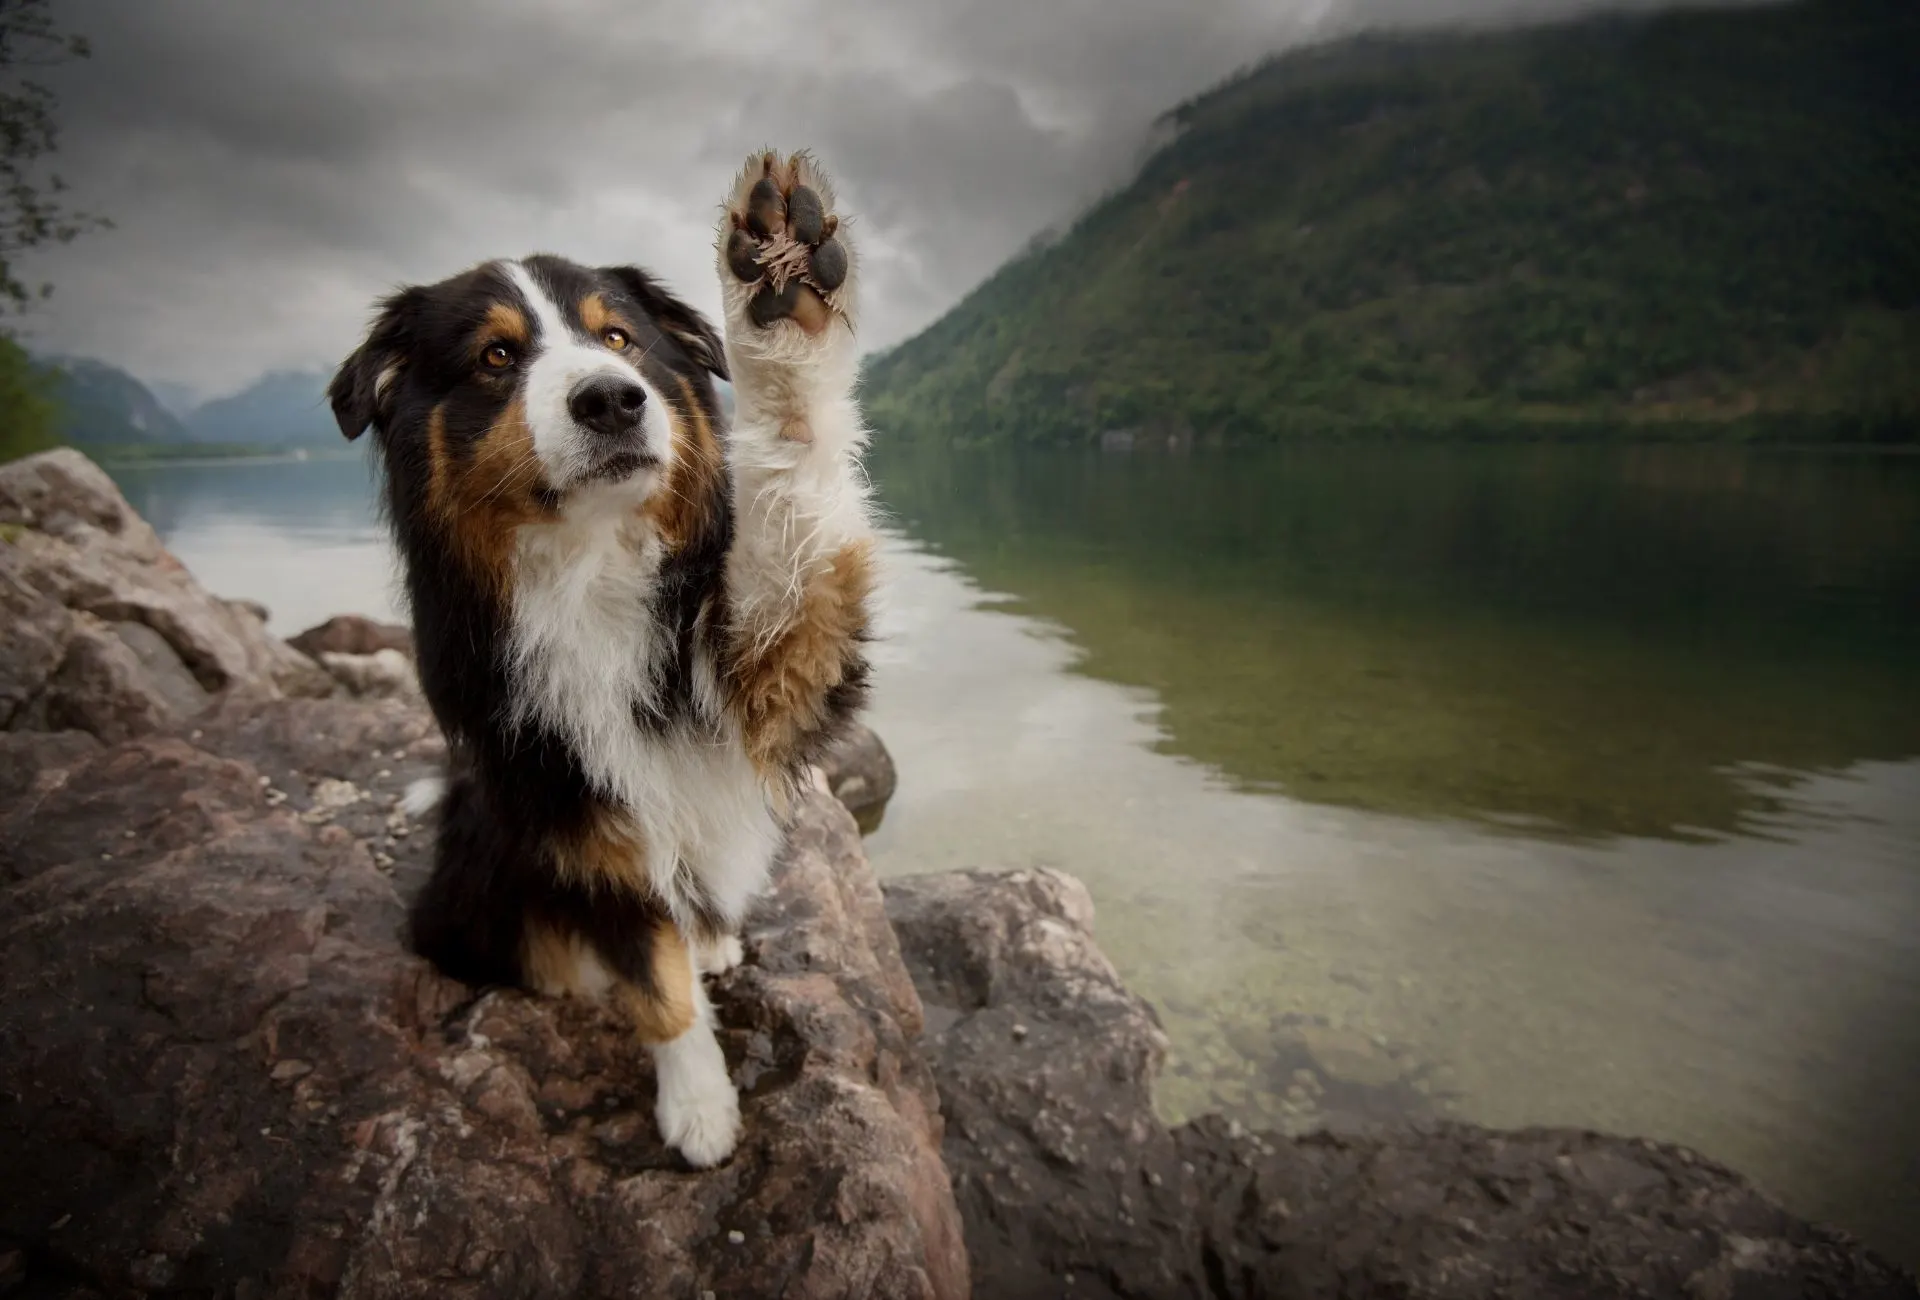 Dog lifts the left paw on a rocky surface which can increase likelihood of getting rough paw pads.